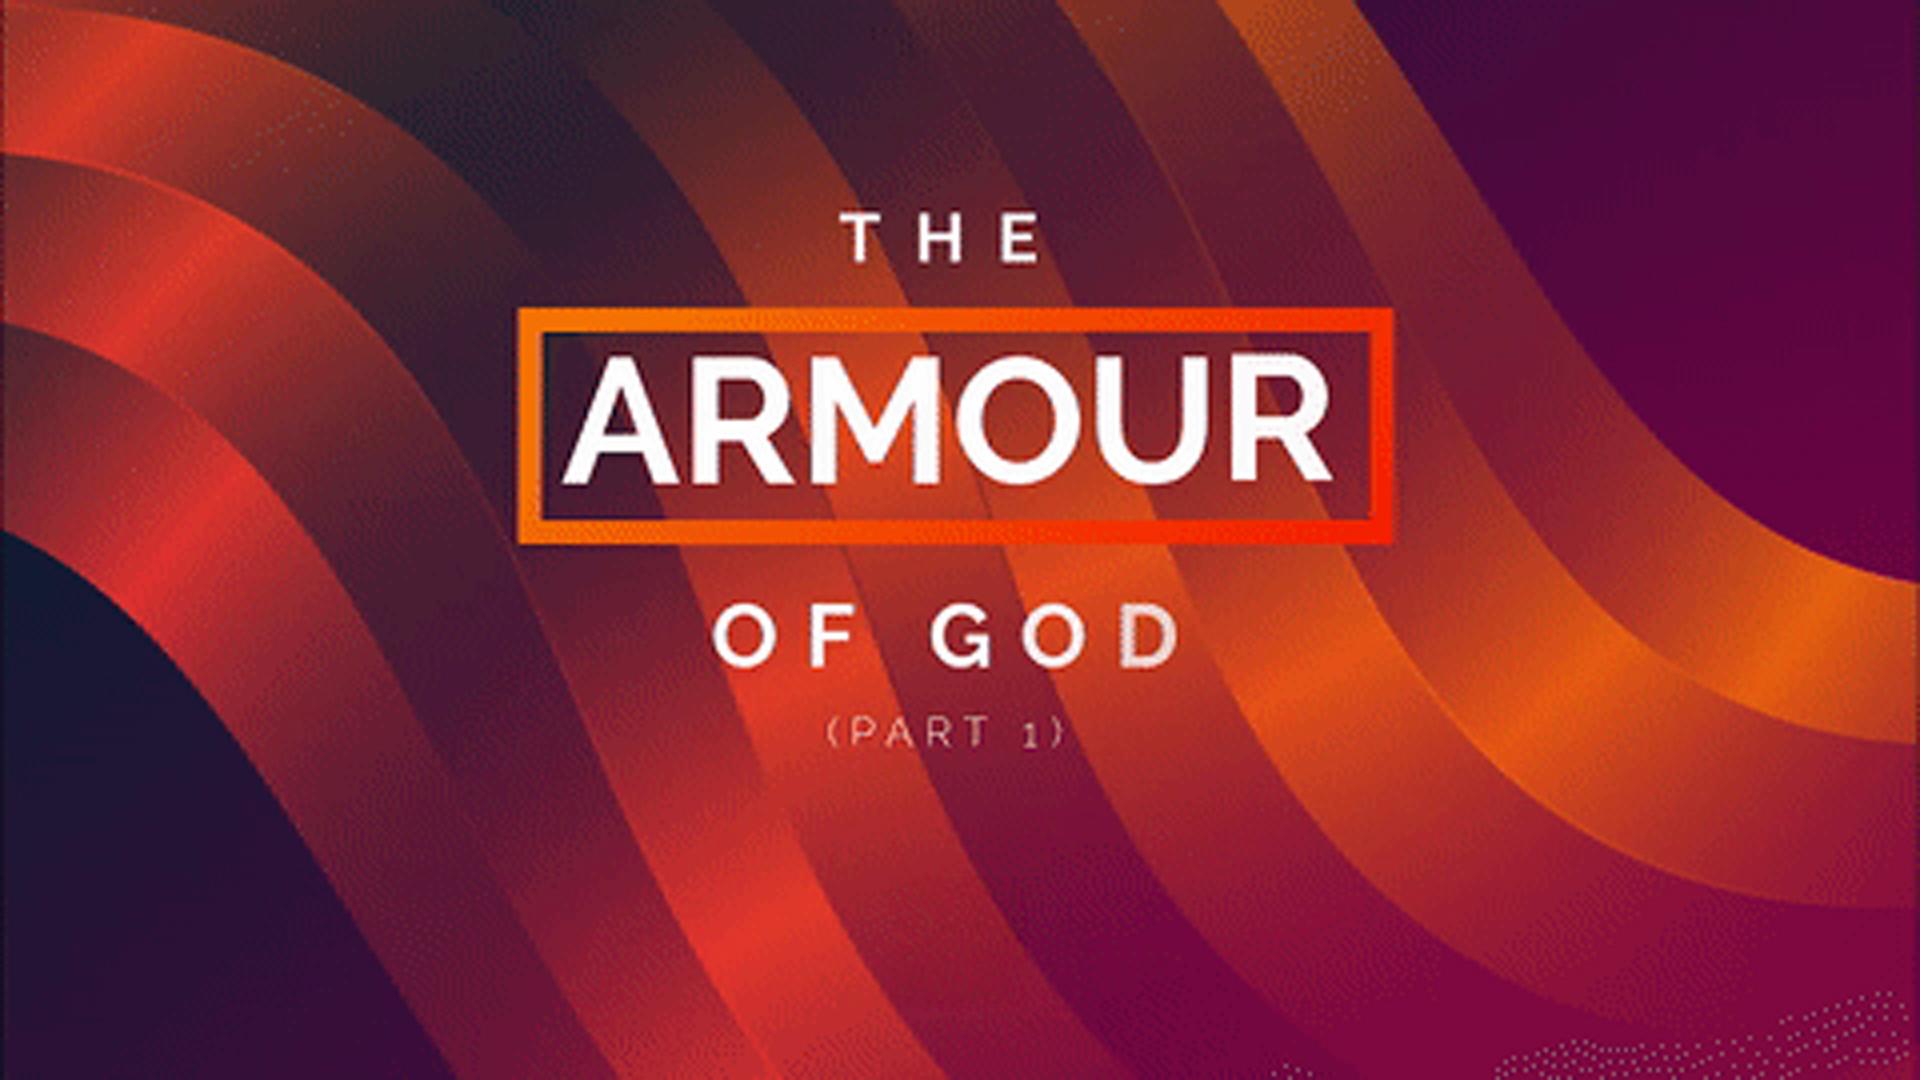 Featured image for “The Armour of God (Part 1)”